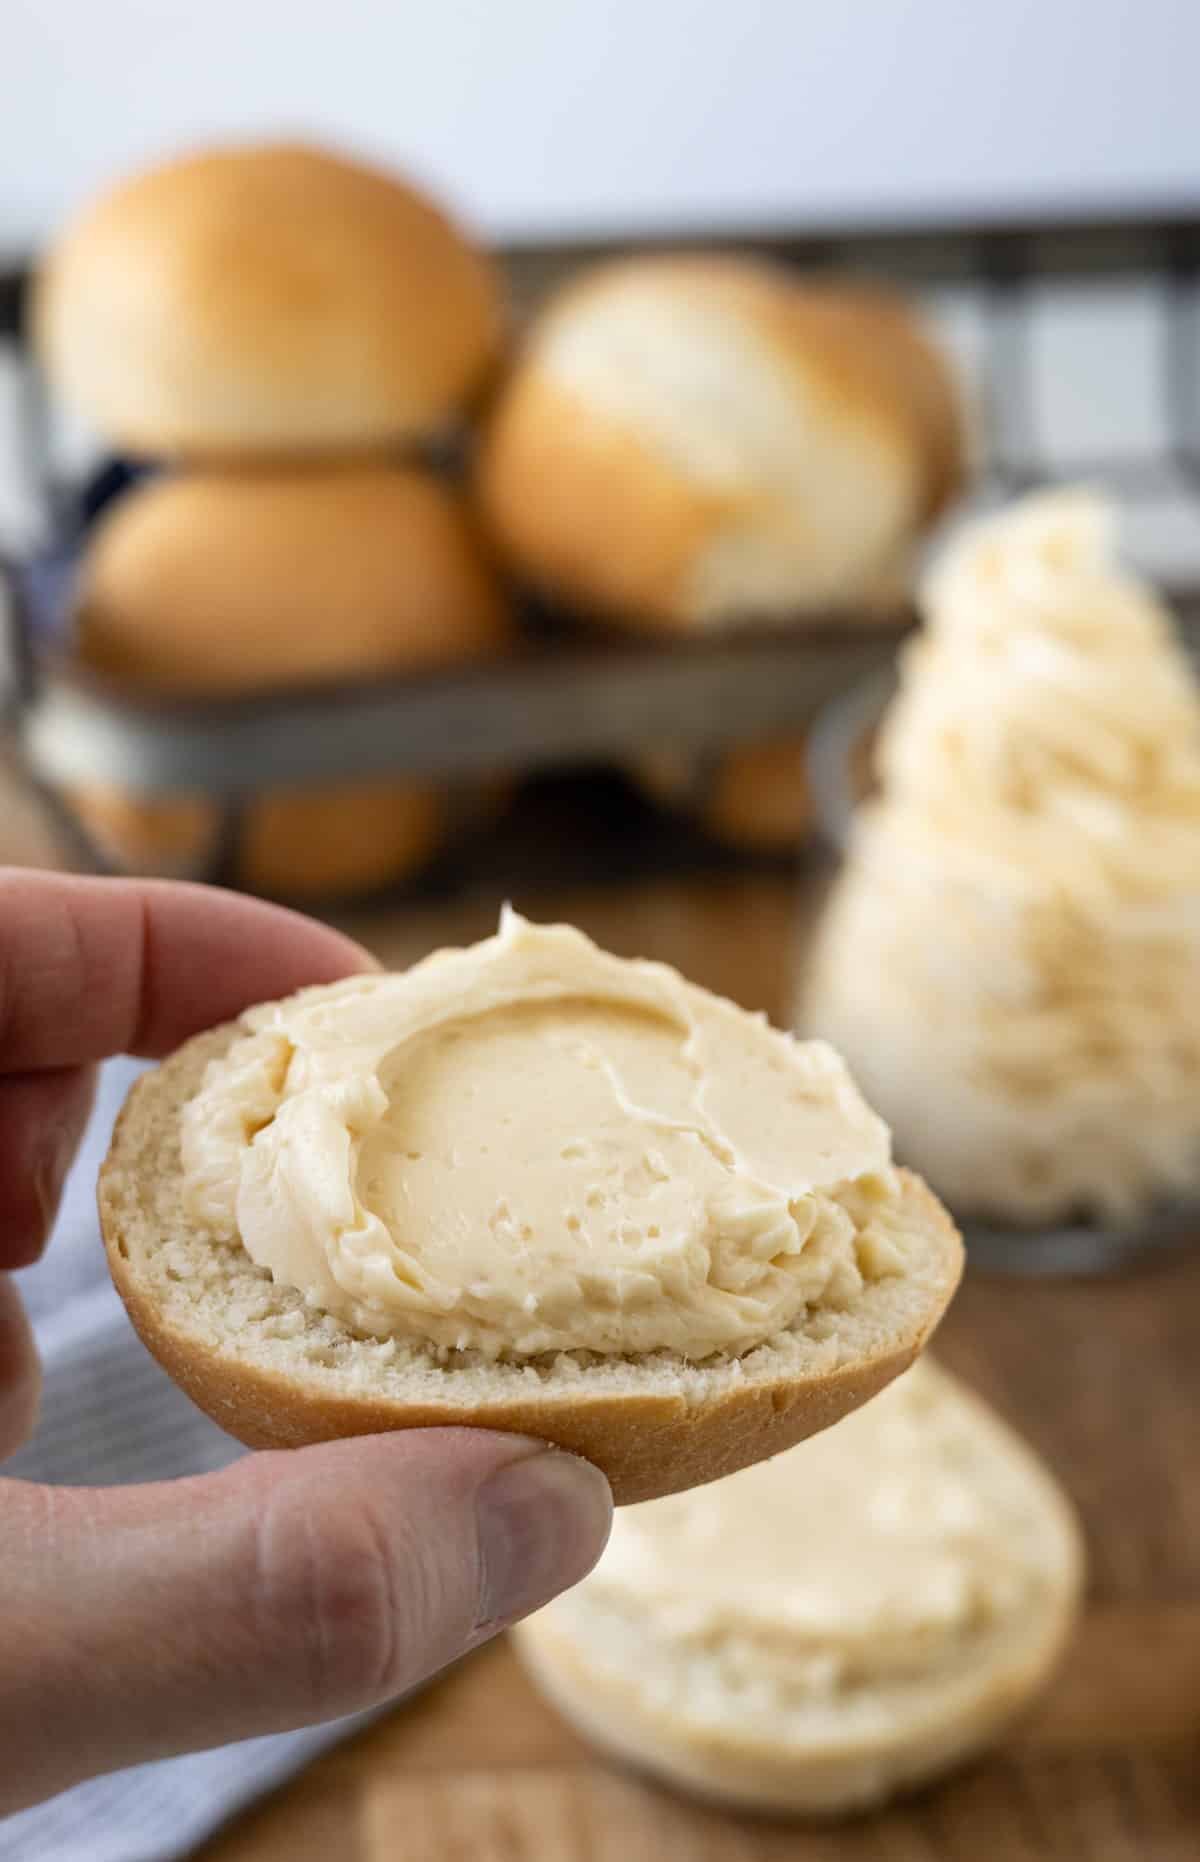 A roll that's spread with honey butter.